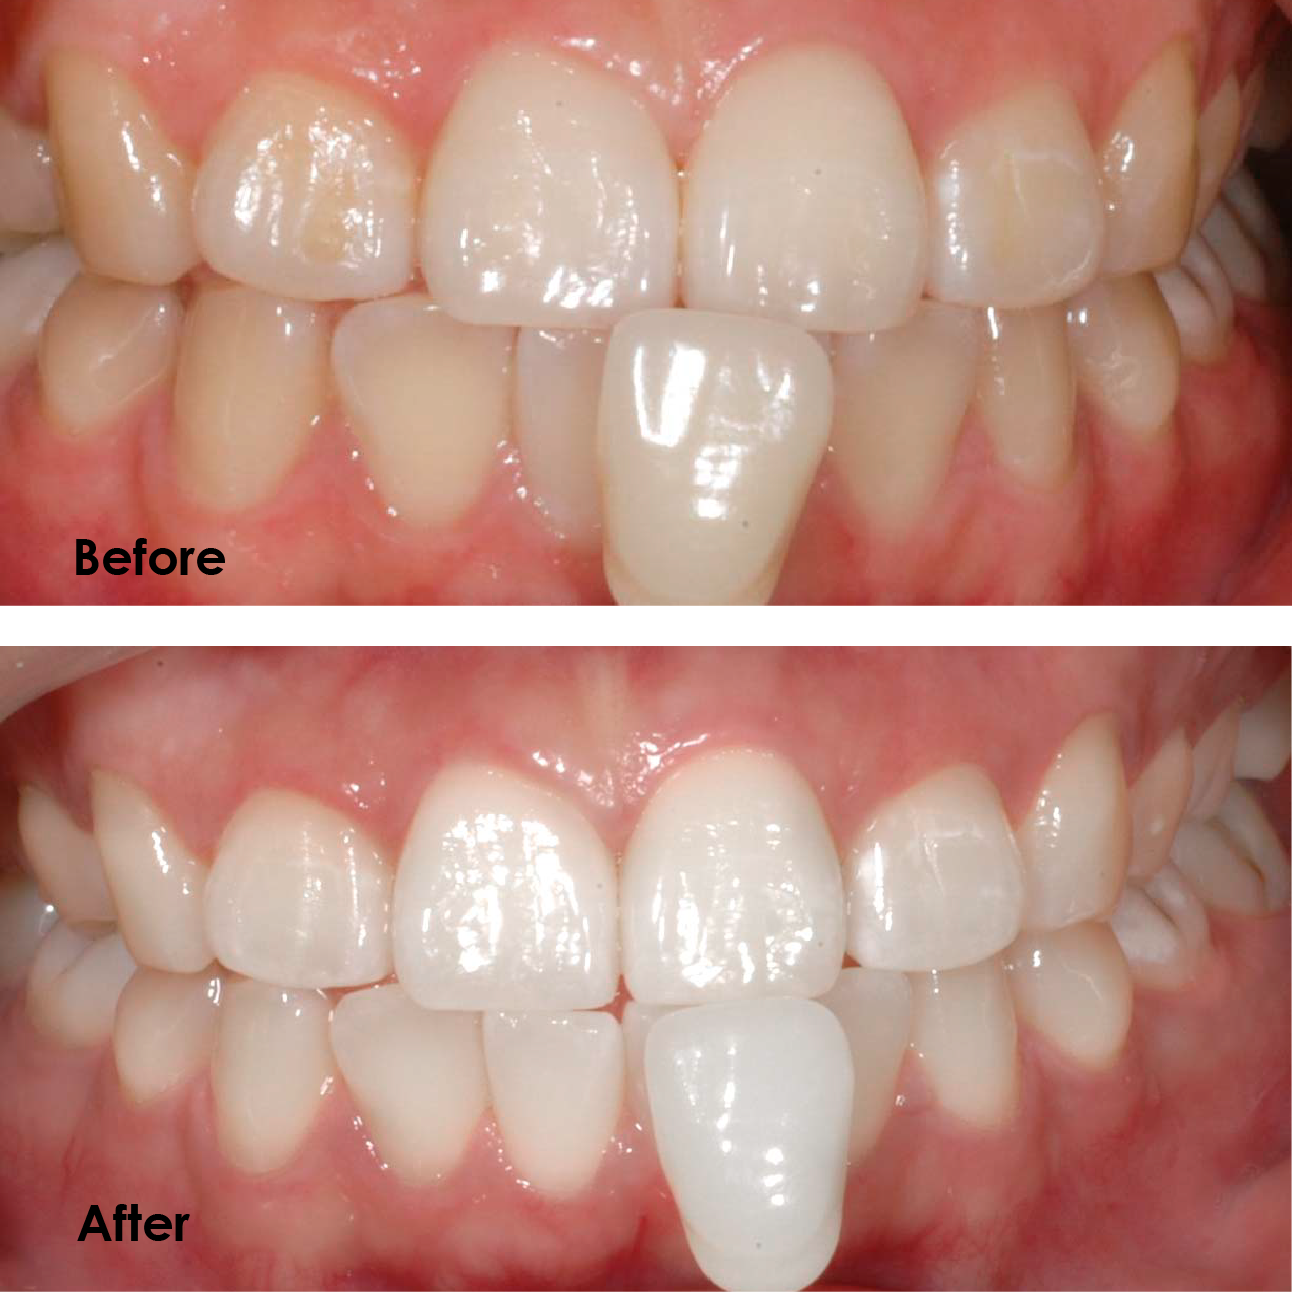 Here is the comparison of Hydra Pearl teeth whitening performance. It has faster results than other leading whitening products, a visibly whiter teeth can be seen after only 5 treatments. Lightens up to 10 shades after one treatment.